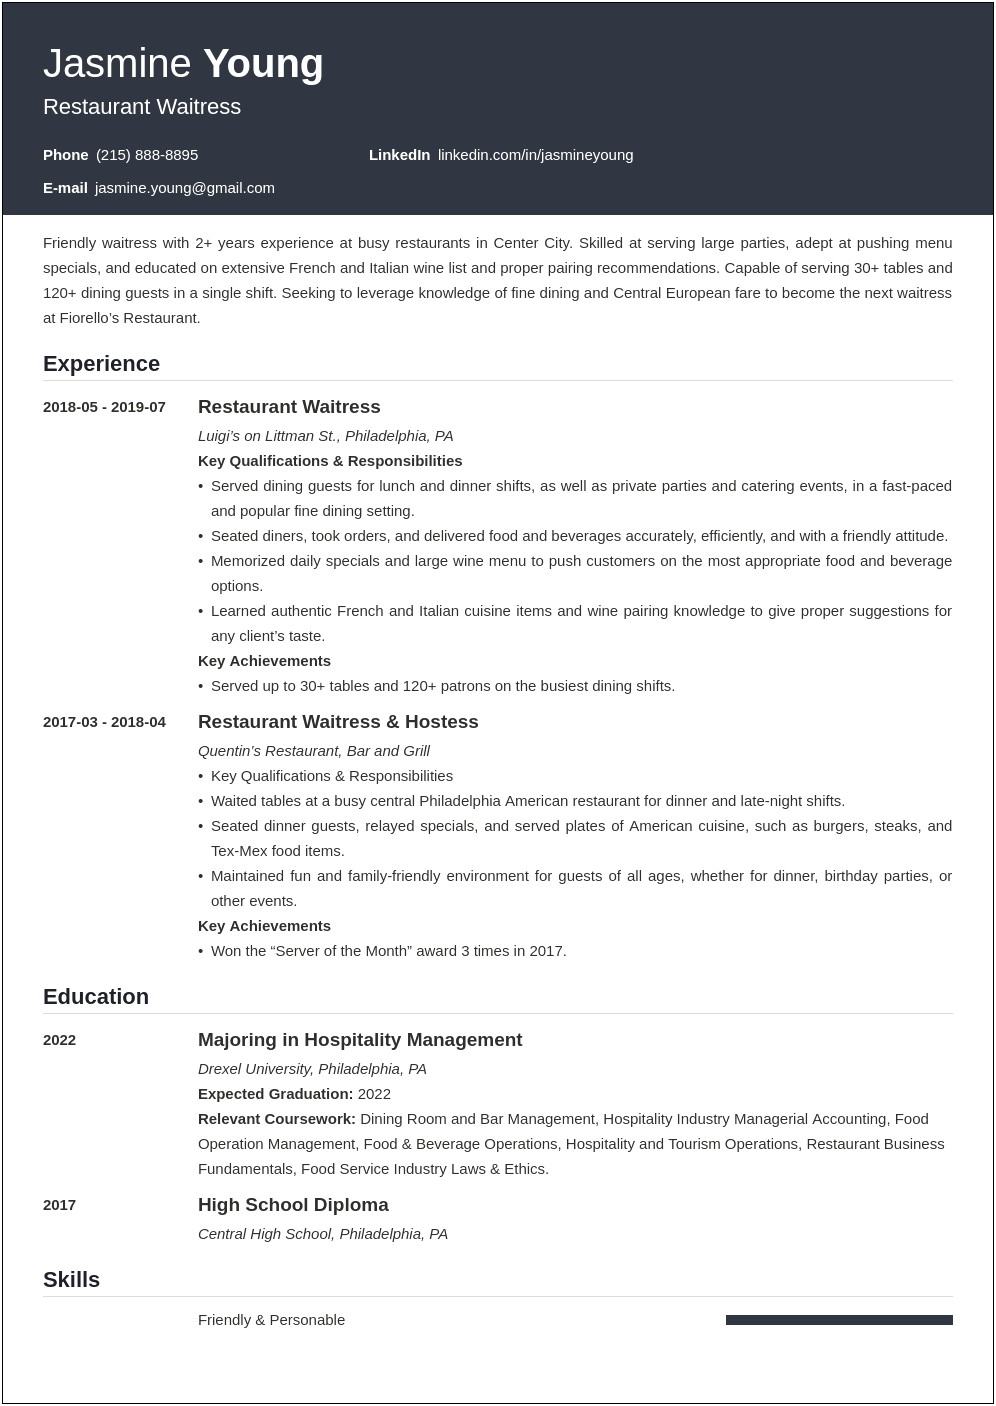 Resume For High School Kid With Little Experience